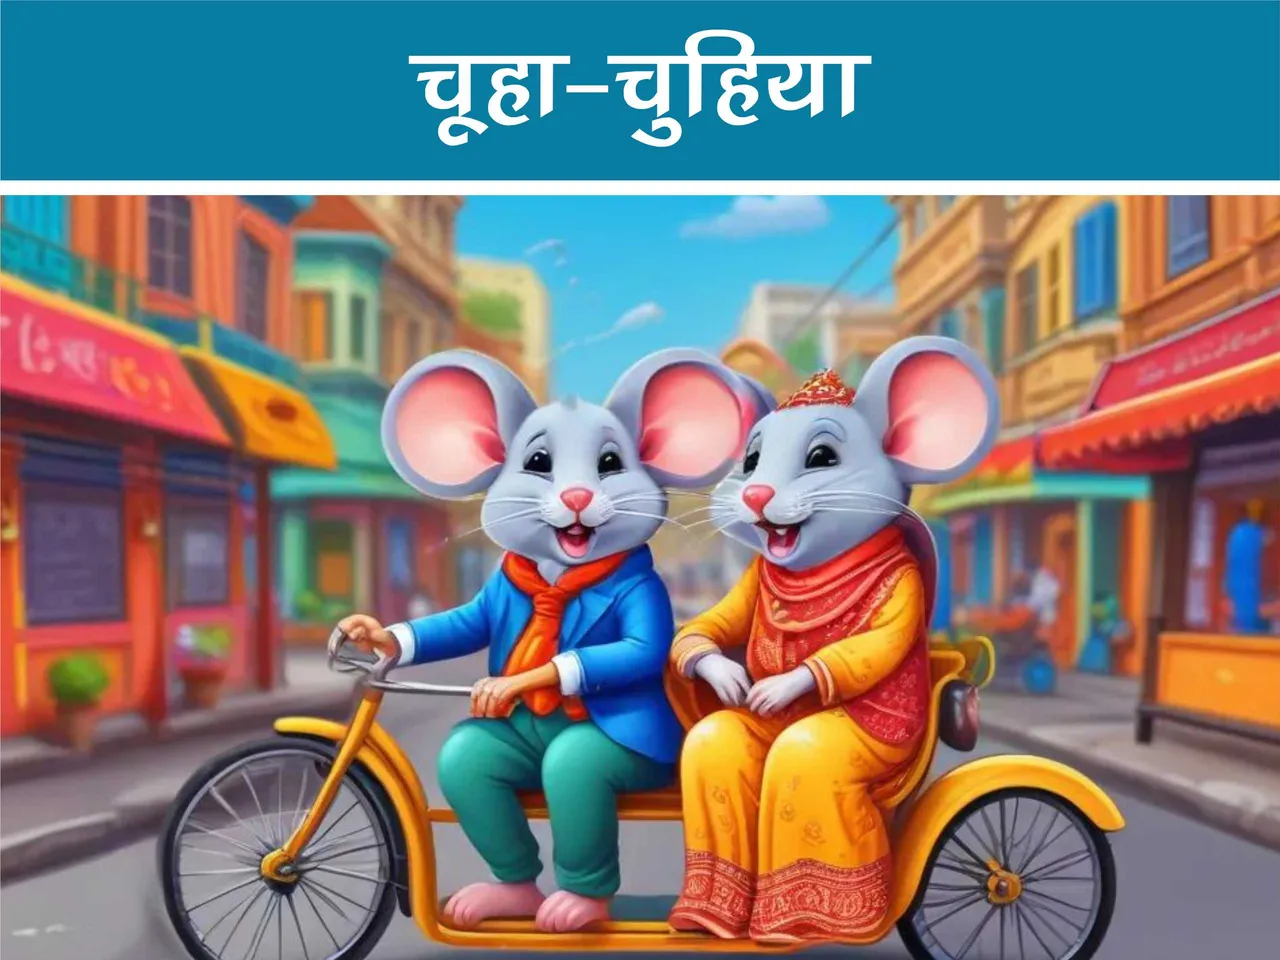 Cartoon image of mouse and mice